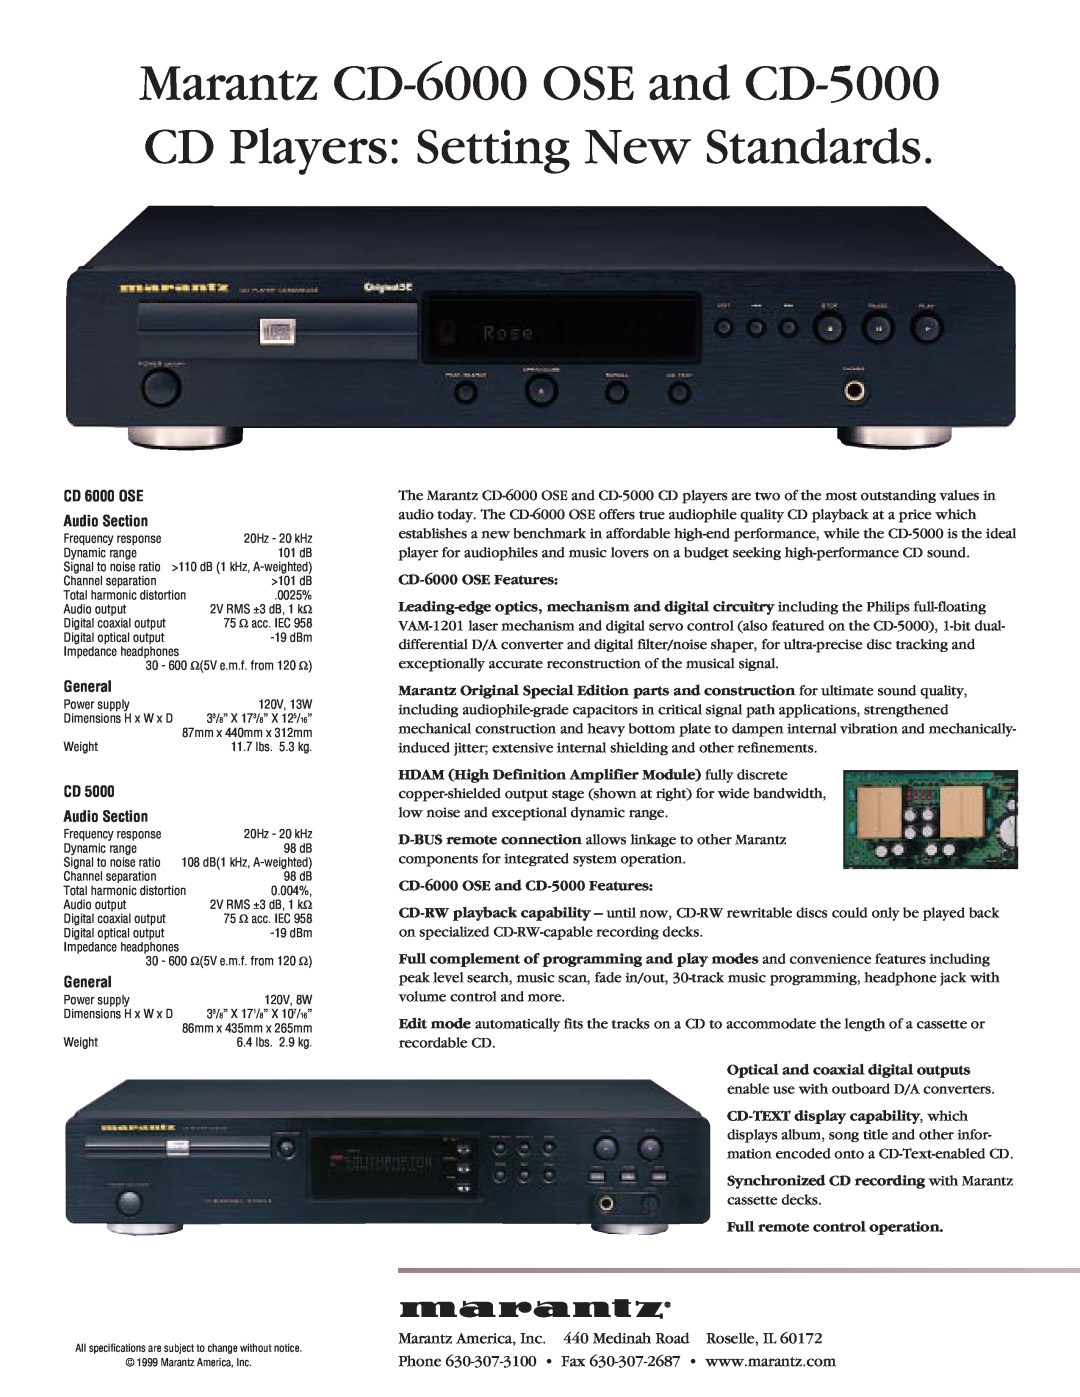 Marantz CD-6000 specifications CD 6000 OSE Audio Section, General, CD Audio Section 